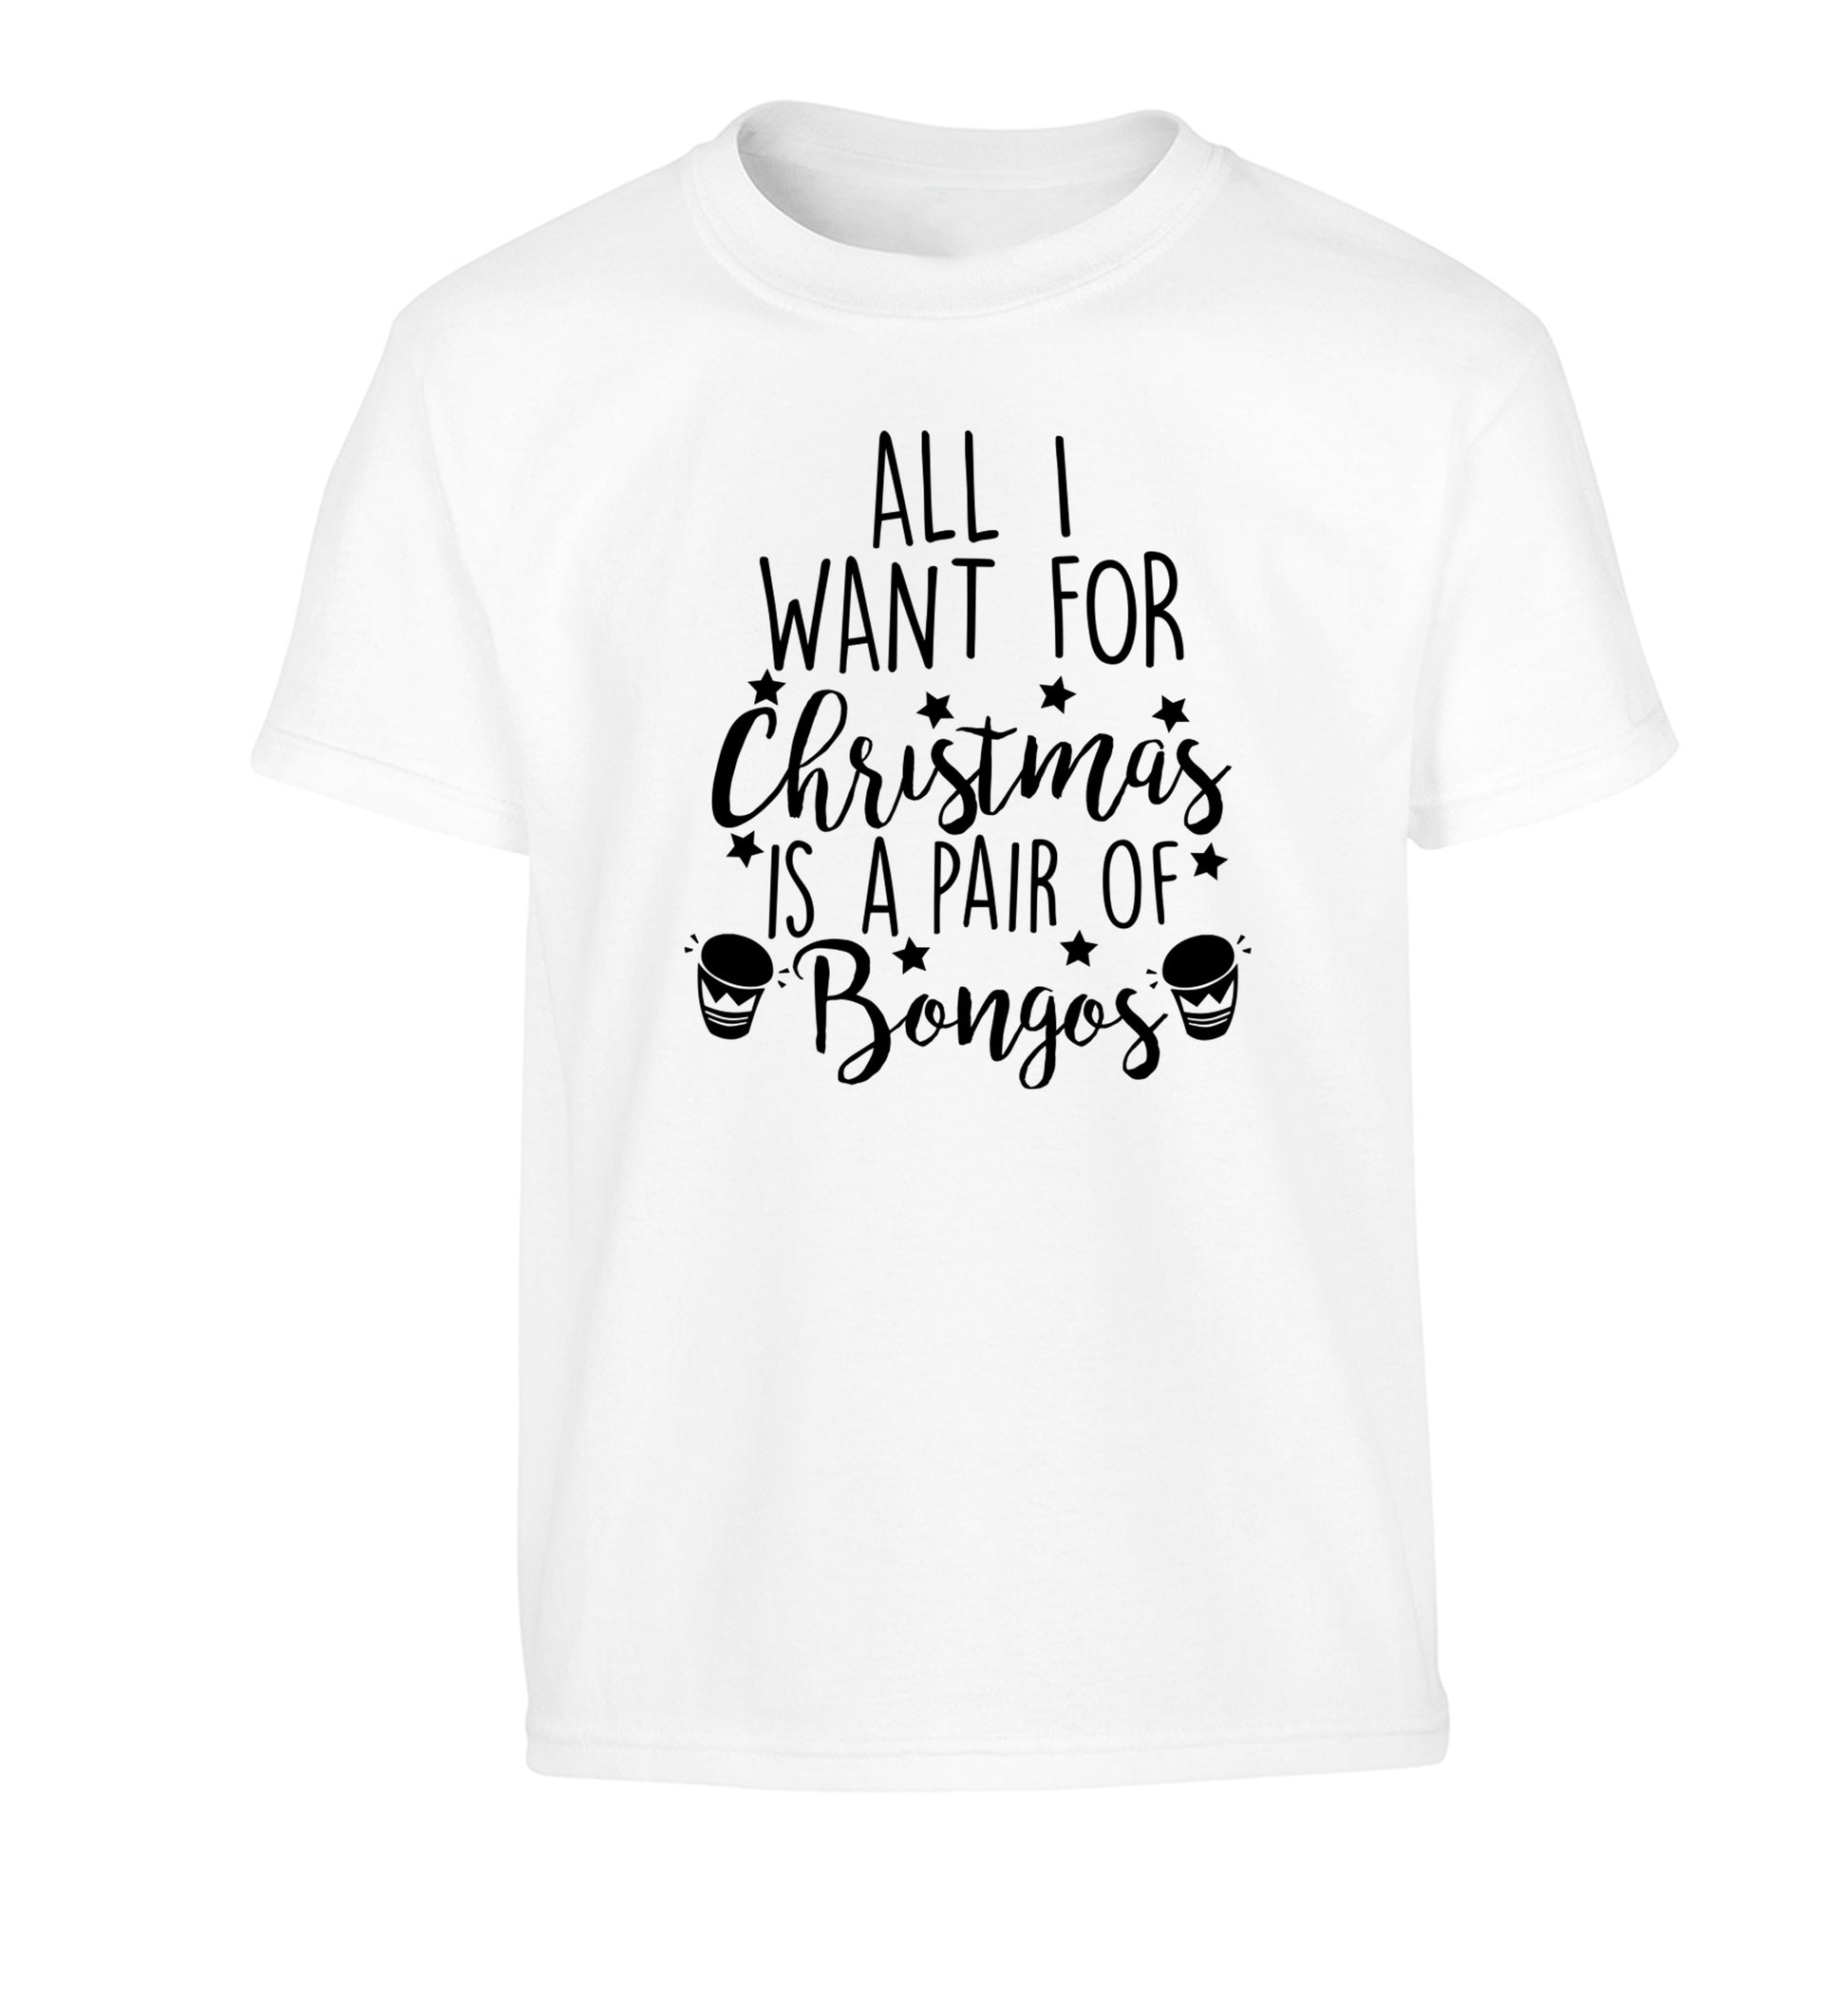 All I want for Christmas is a pair of bongos! Children's white Tshirt 12-14 Years